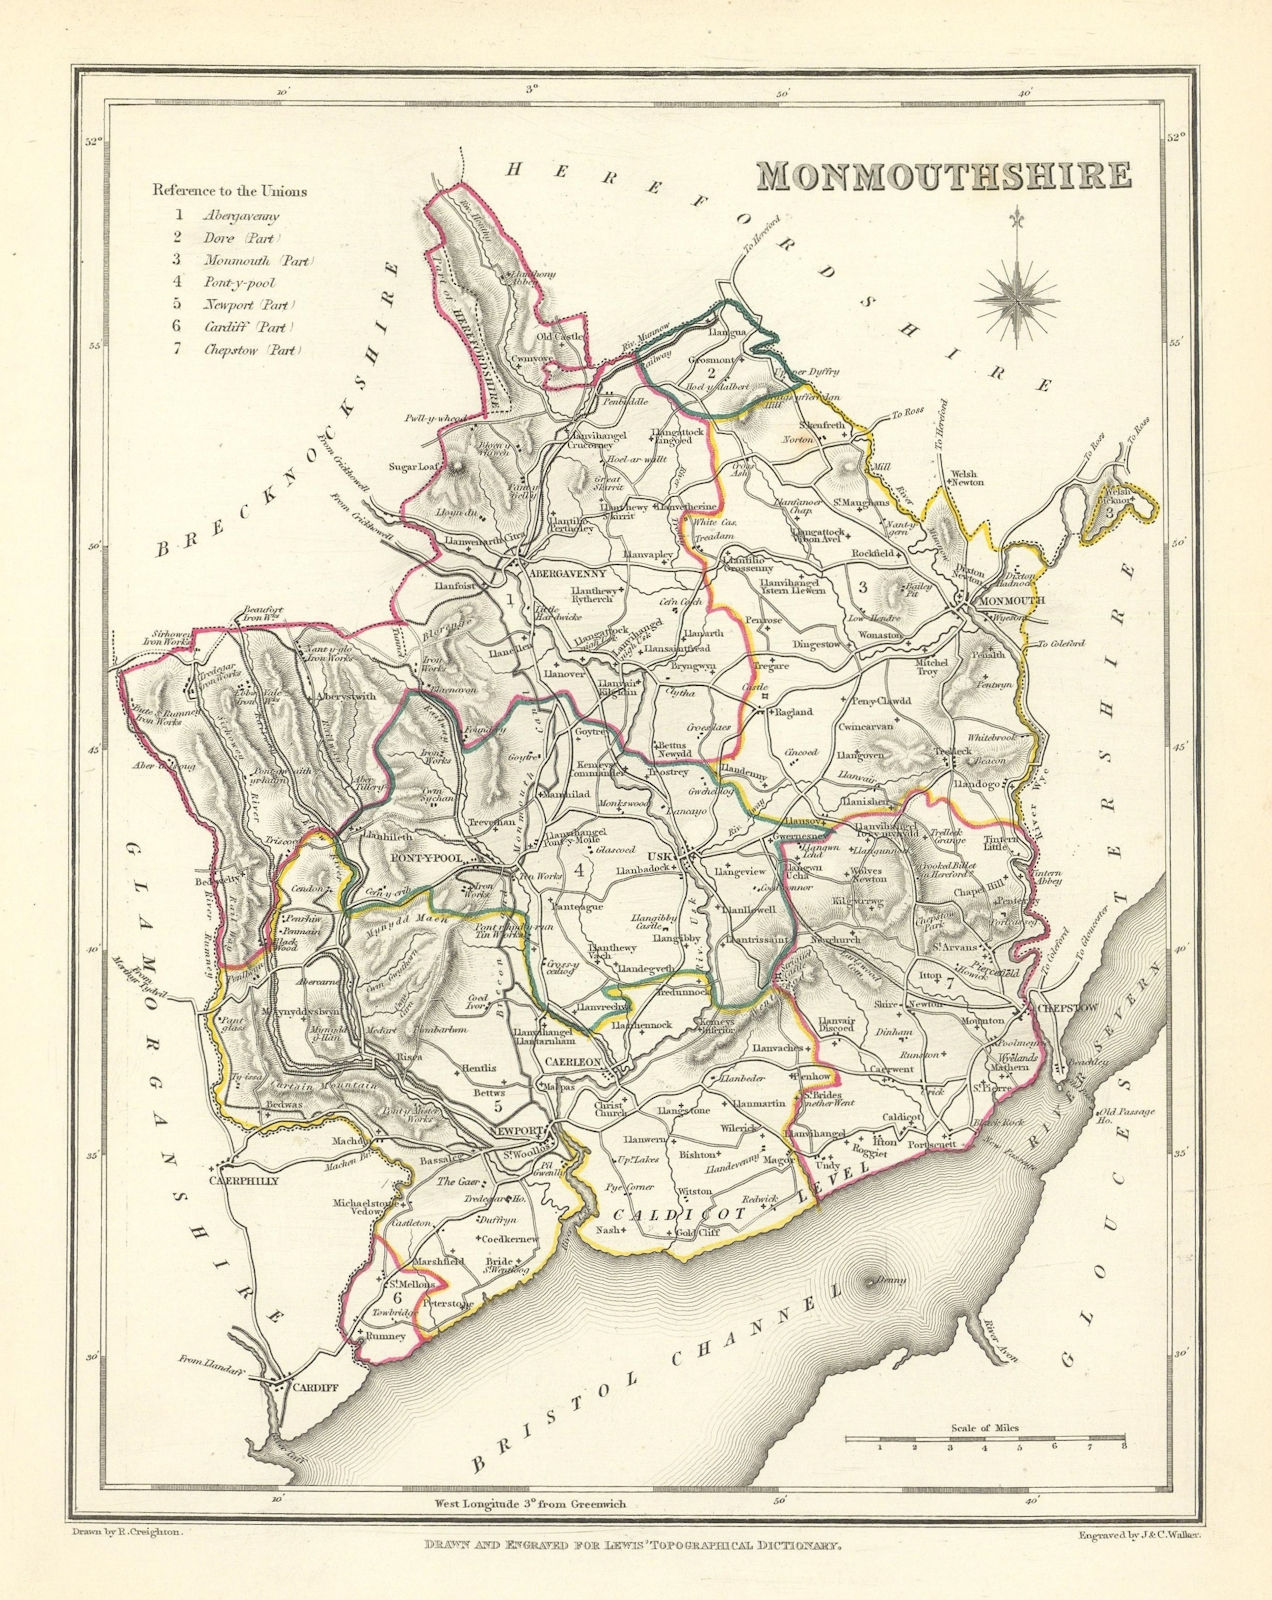 Antique county map of MONMOUTHSHIRE by Creighton & Walker for Lewis c1840